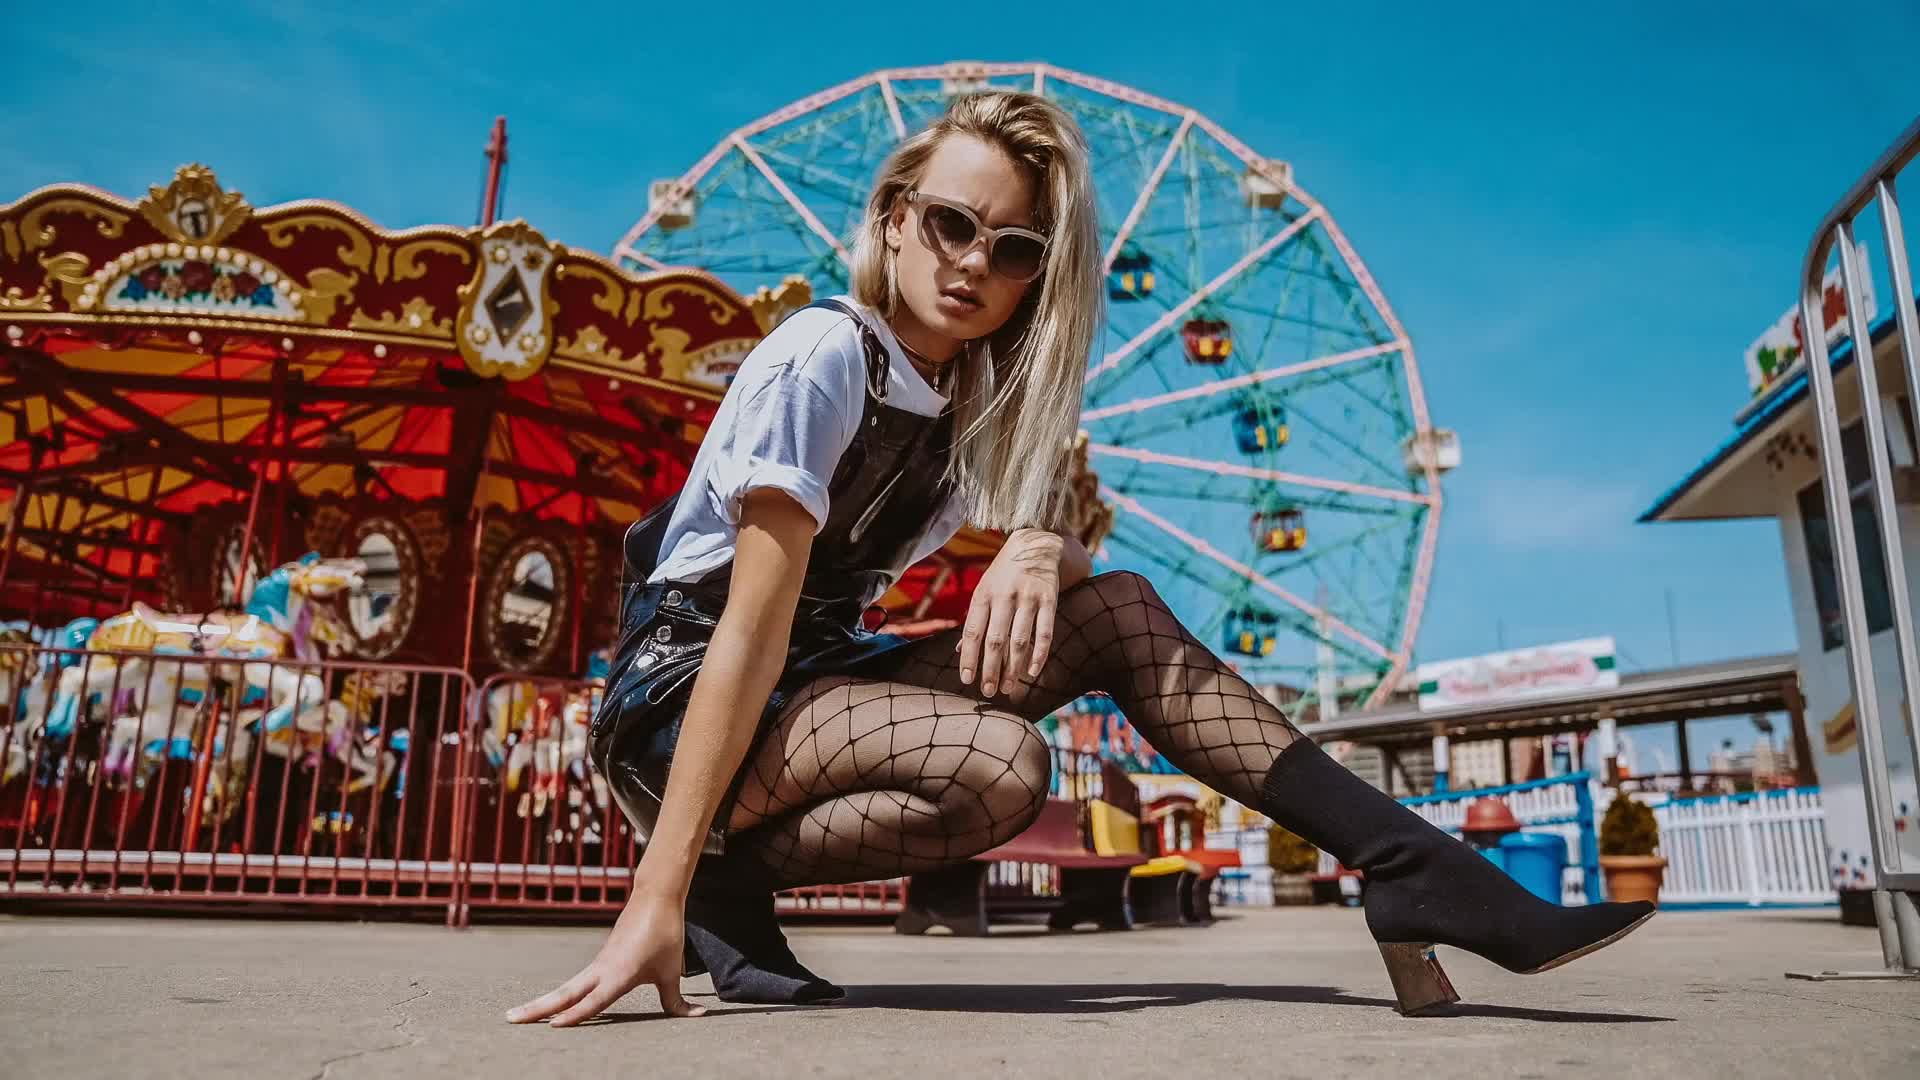 Blonde with sunglasses and fishnet stockings